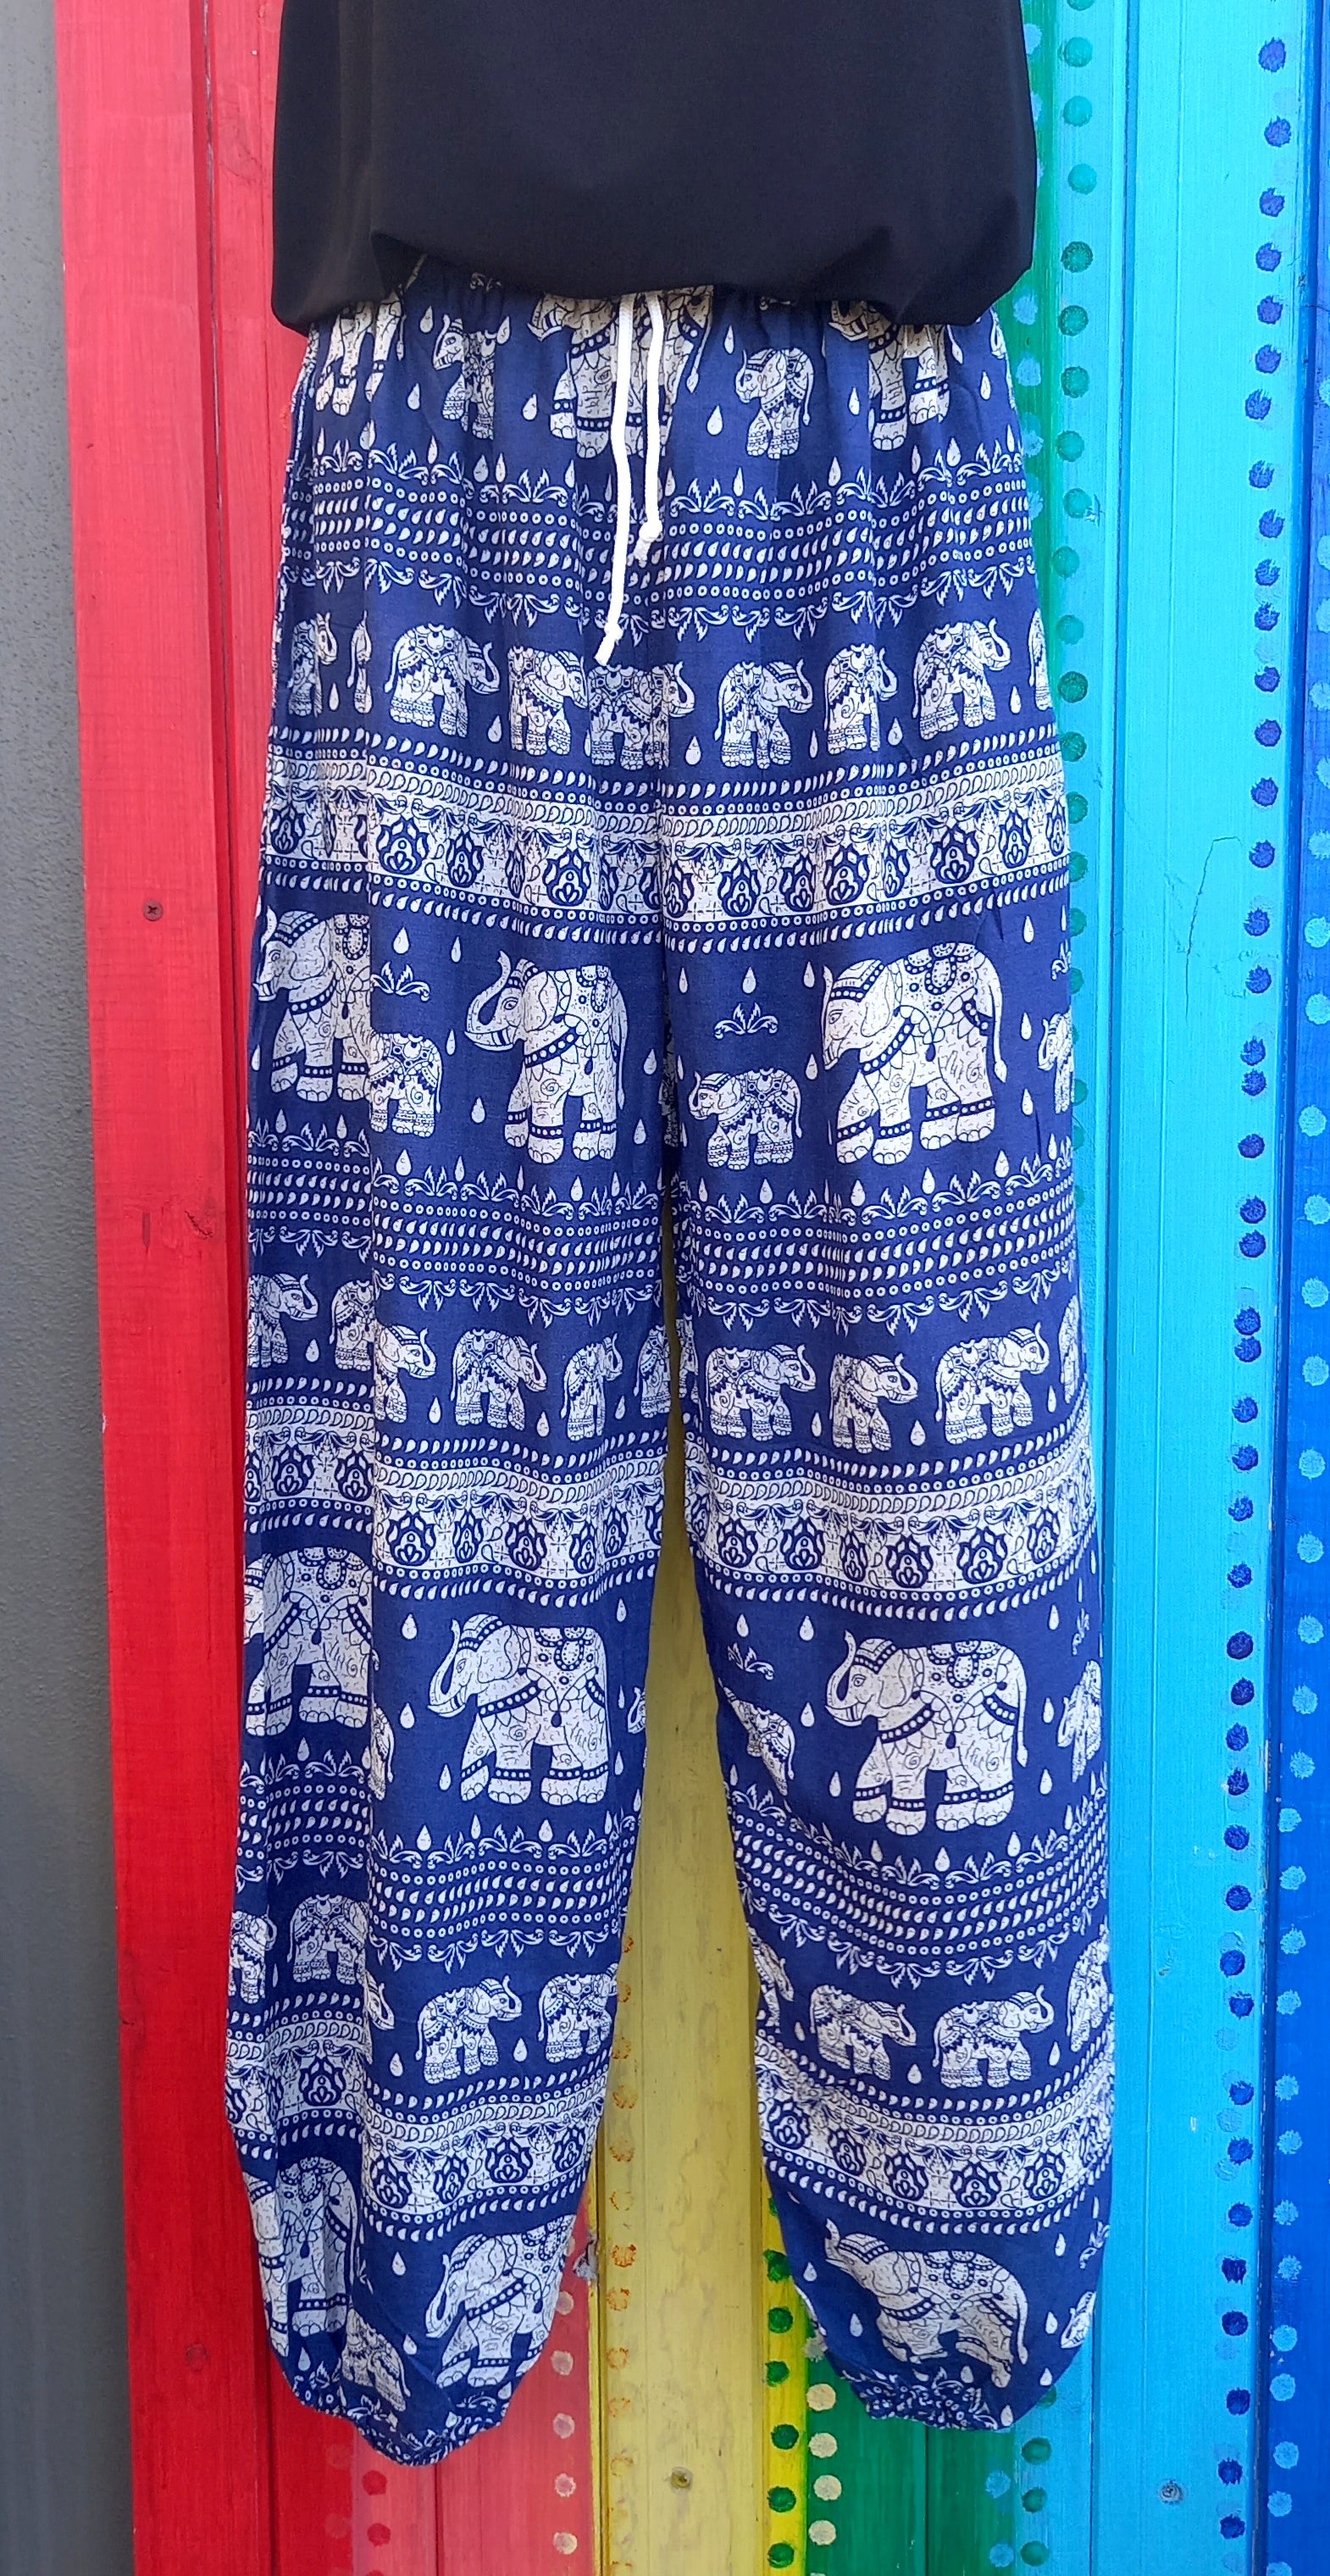 Thai Elephant Pants Makers Are Confident In Competing With 'Made in China'